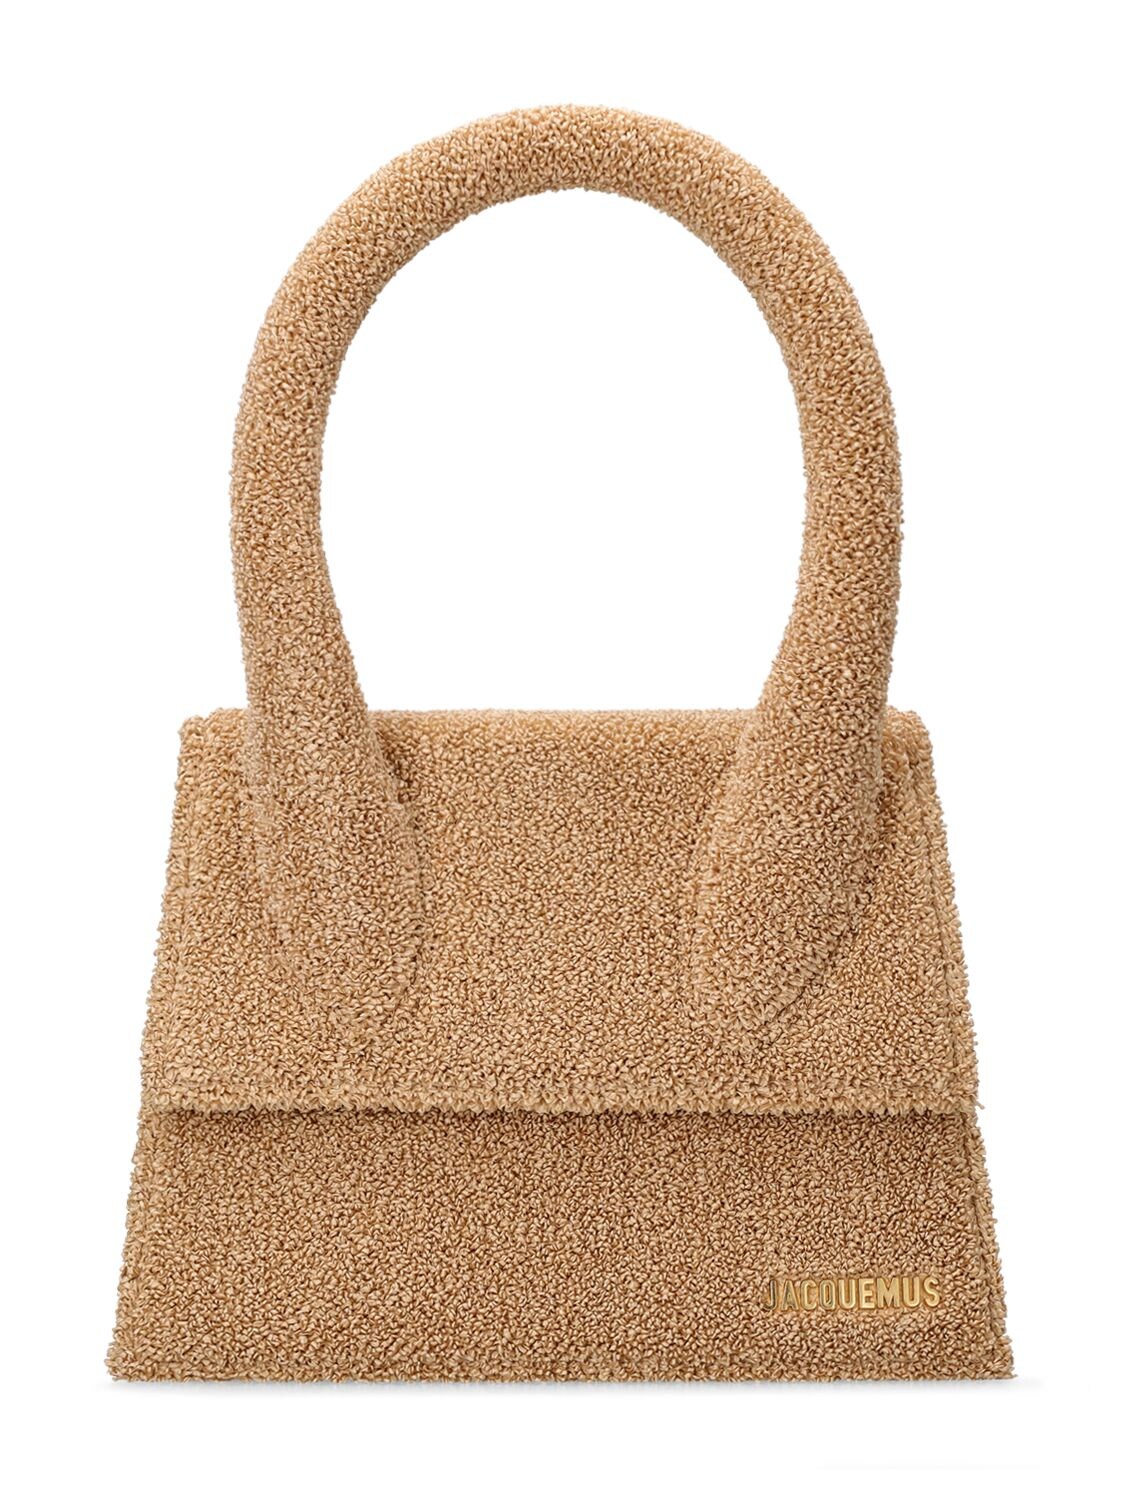 JACQUEMUS Le Grand Chiquito Leather Top Handle Bag